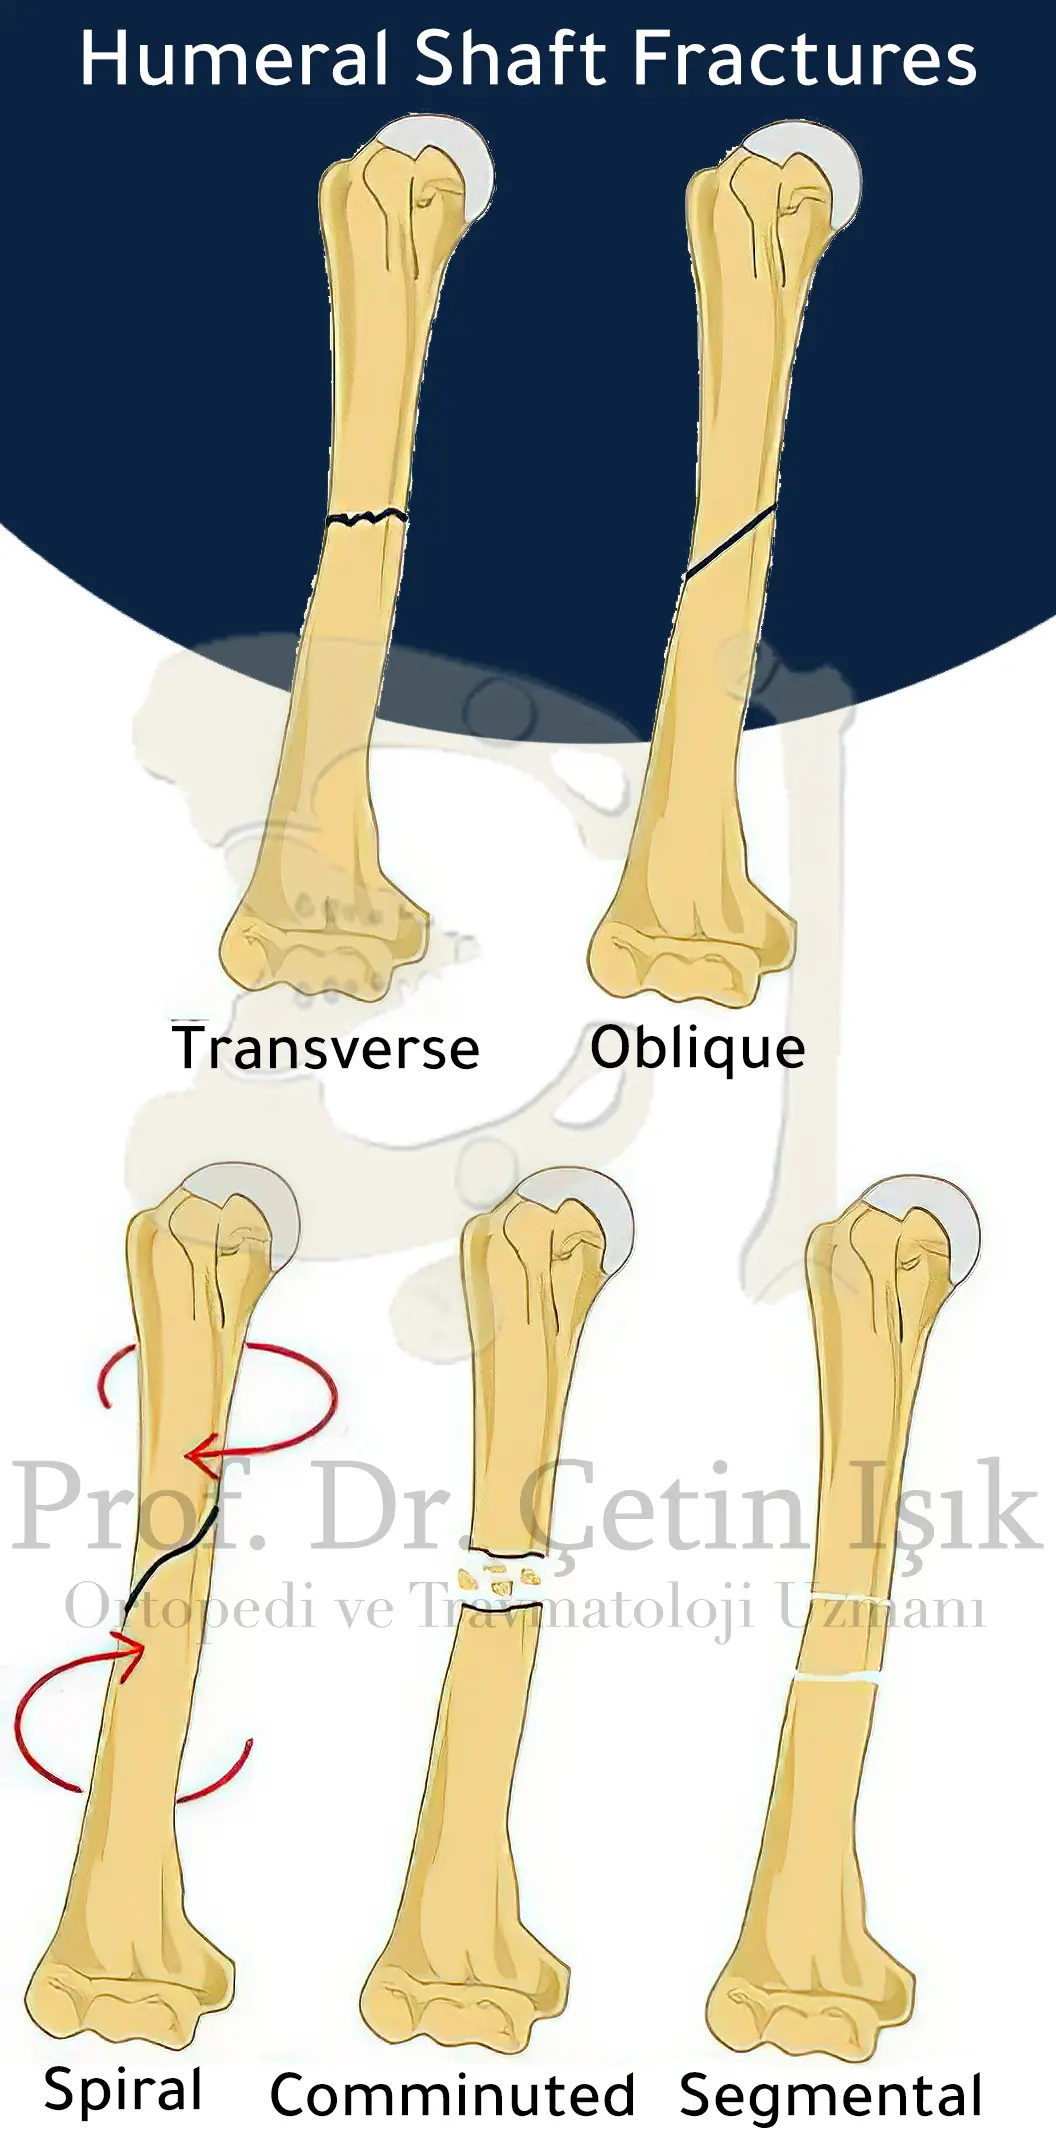 Image showing the different types of humerus fracture